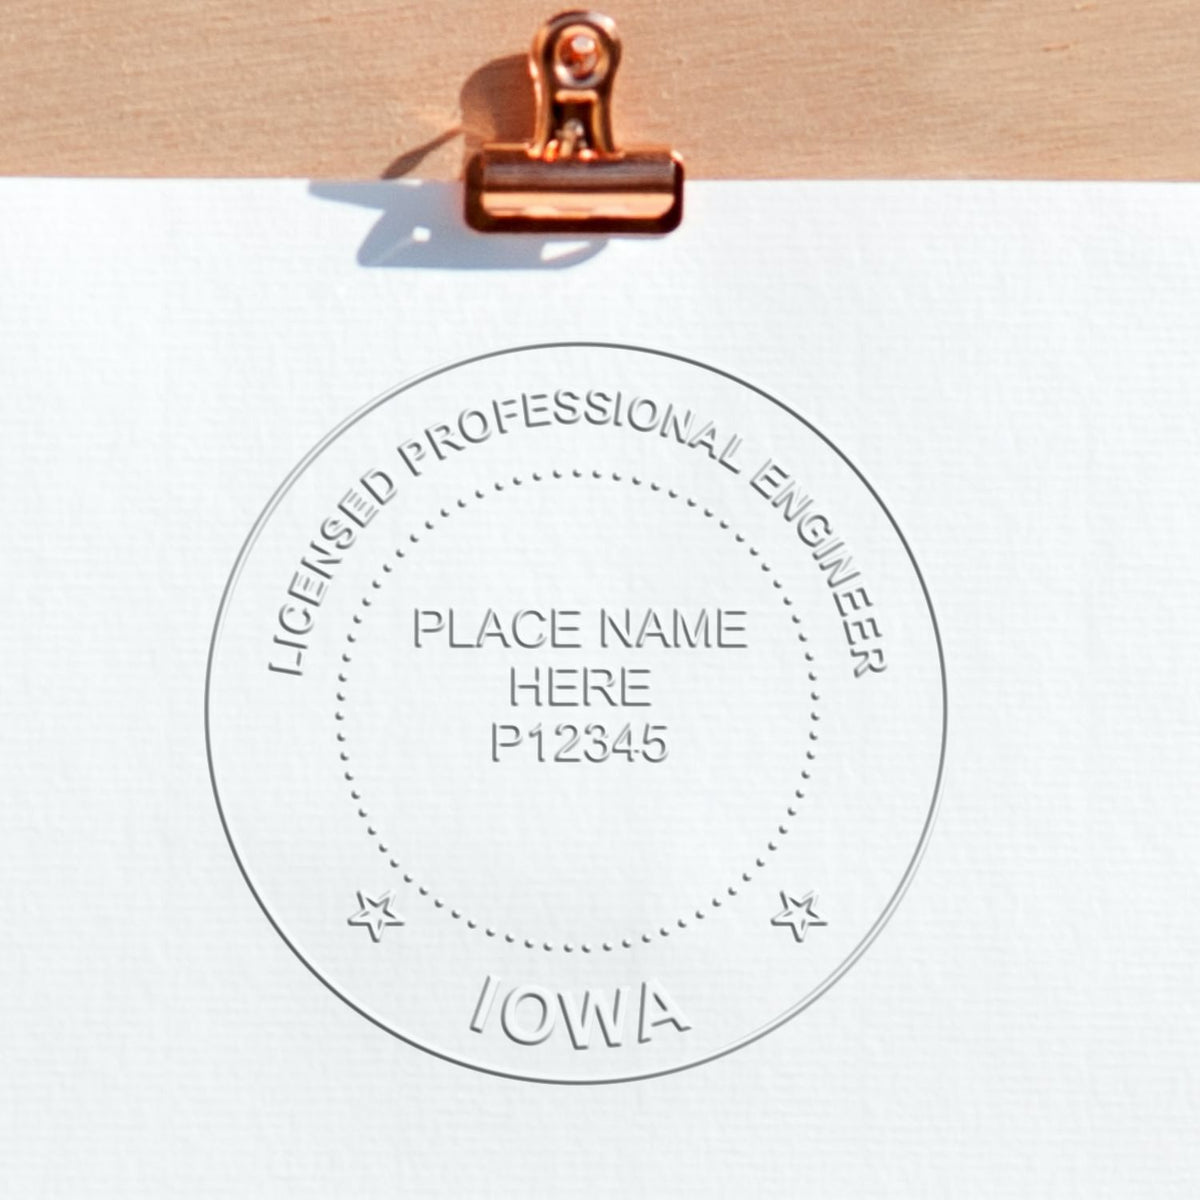 A stamped impression of the Soft Iowa Professional Engineer Seal in this stylish lifestyle photo, setting the tone for a unique and personalized product.